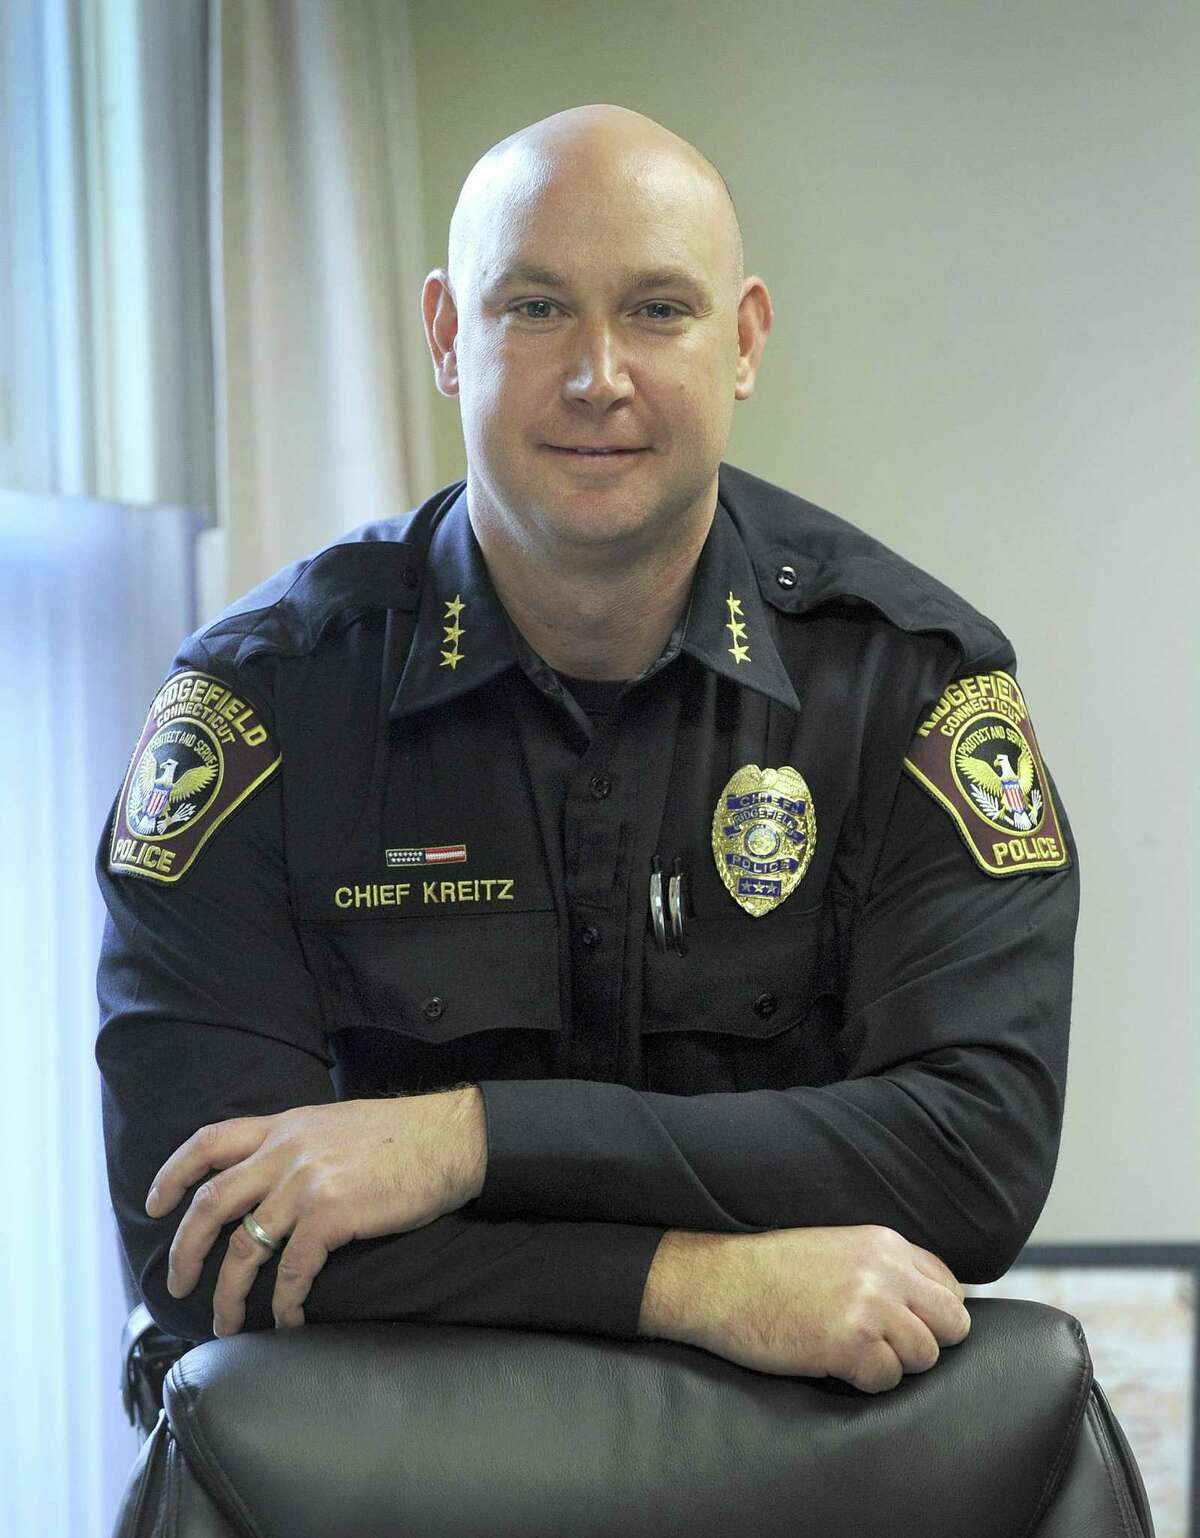 Jeff Kreitz was named the new chief of the Ridgefield Police Department last week, replacing former Chief John Roche, who died this summer after announcing his retirement. Photo Monday, Nov. 5, 2018.